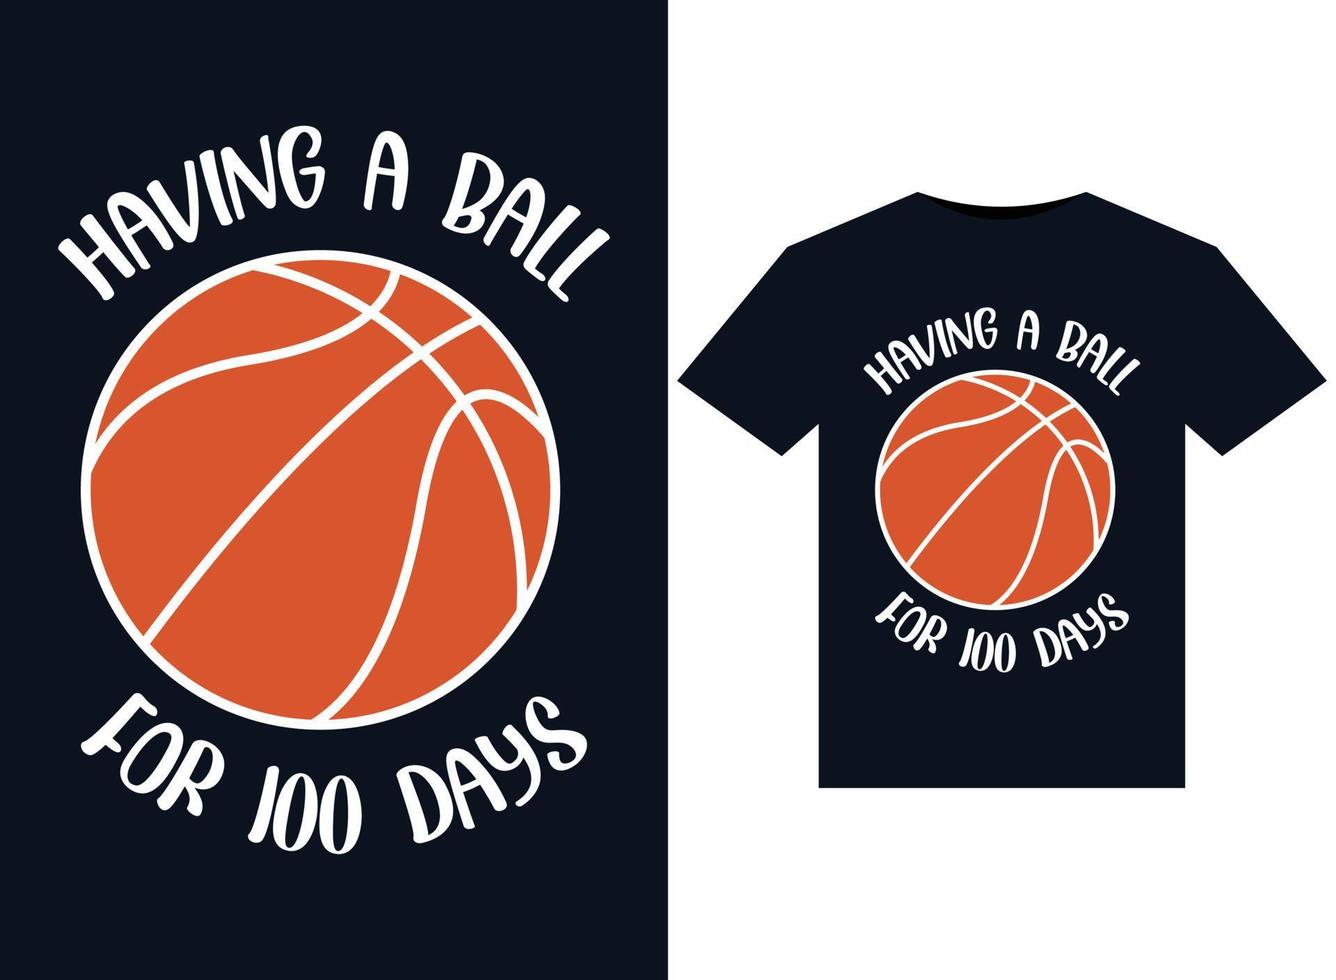 Having a ball for 100 days illustrations for print-ready T-Shirts design vector